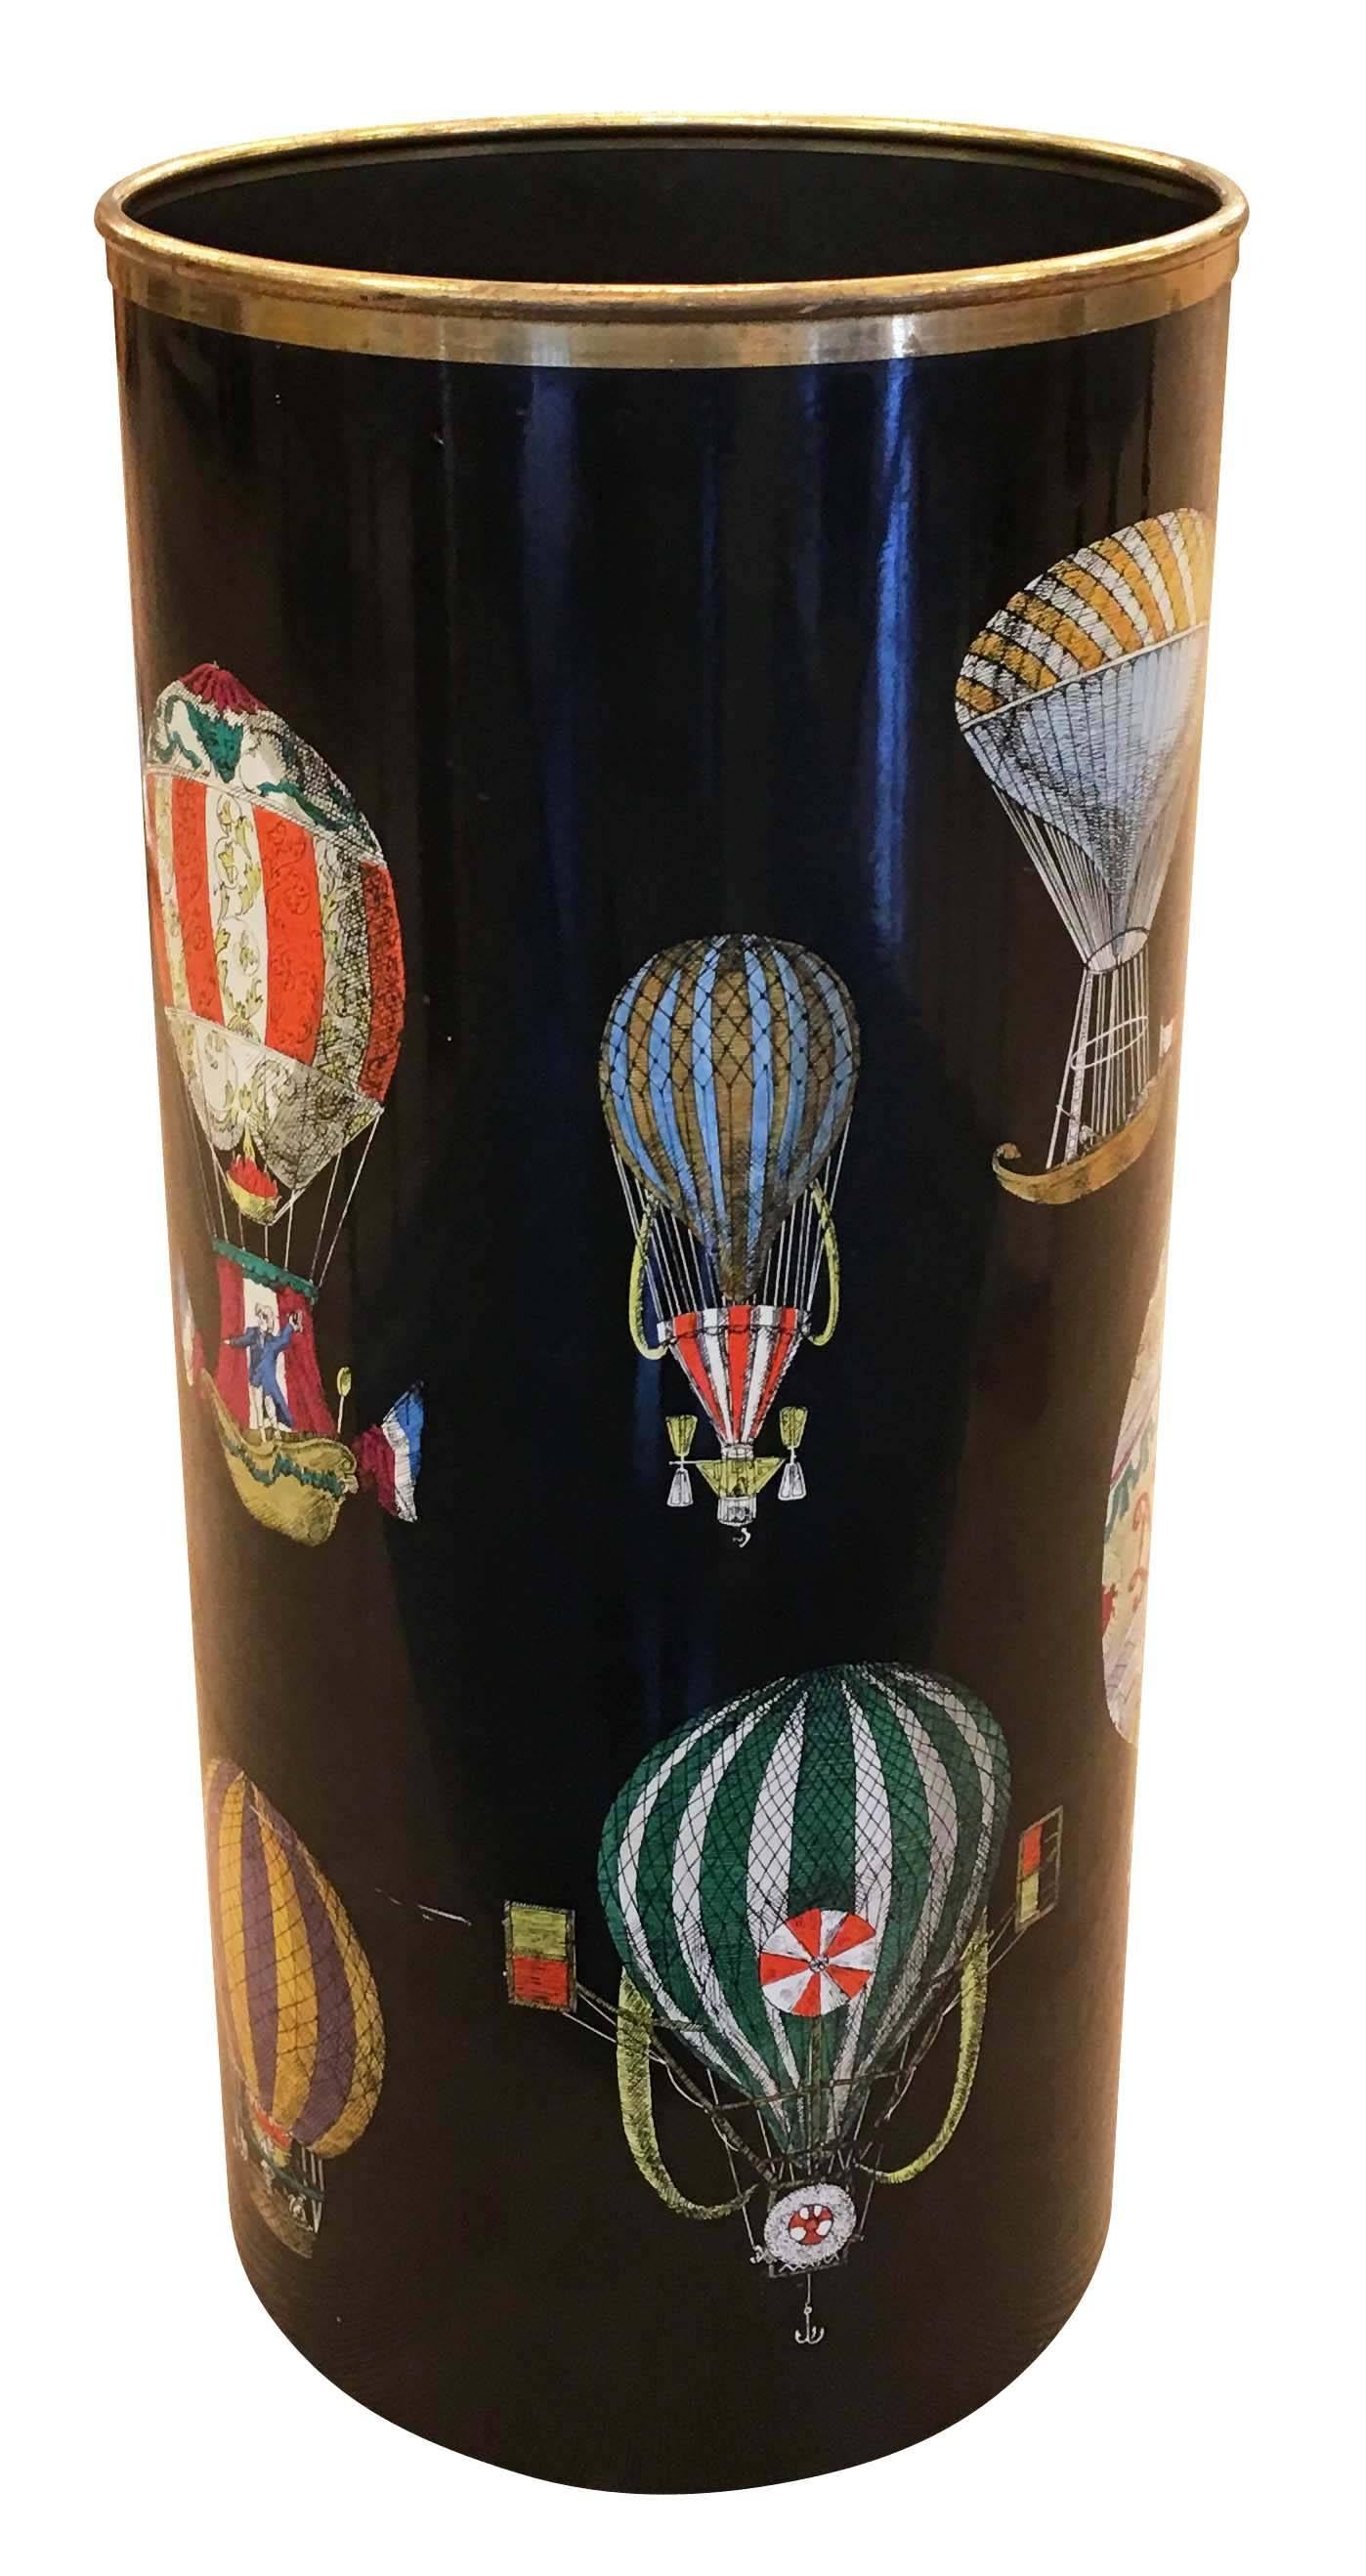 Piero Fornasetti “Mongolfiere” umbrella stand portraying a hot air balloon motif on black background. The rim is brass.